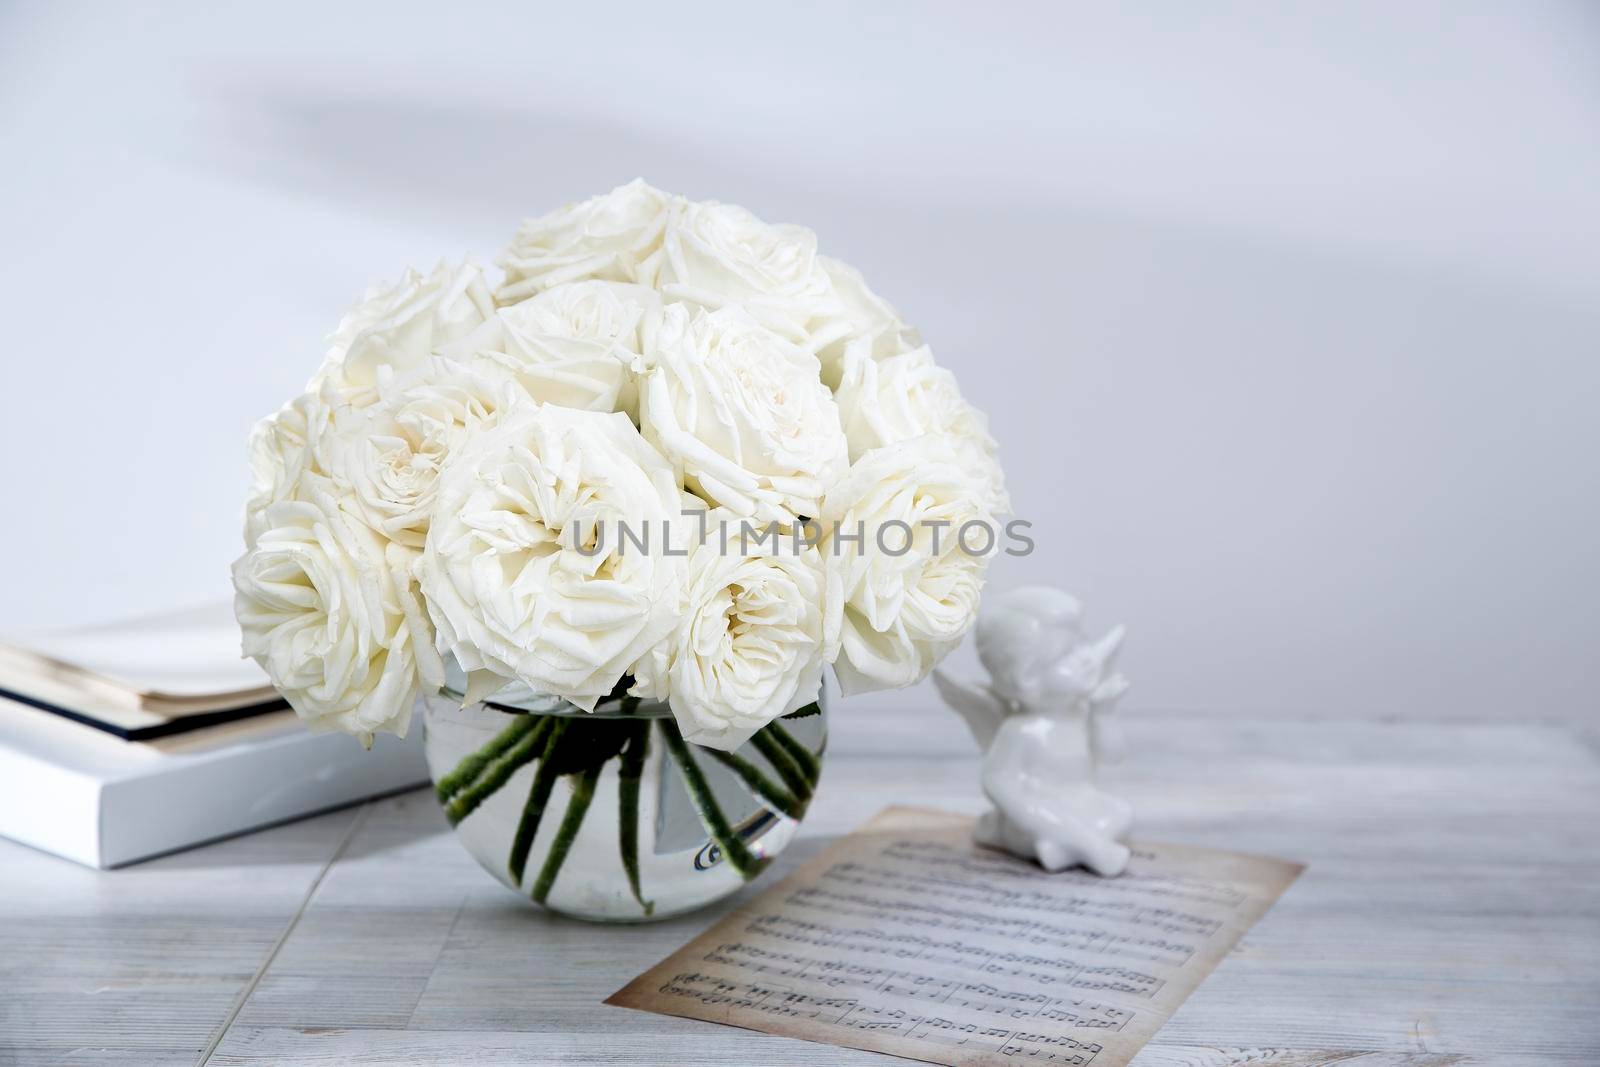 A bouquet of white roses in a round glass vase on a table with a cup of tea and a book. Copy space. Figurine of pears by elenarostunova